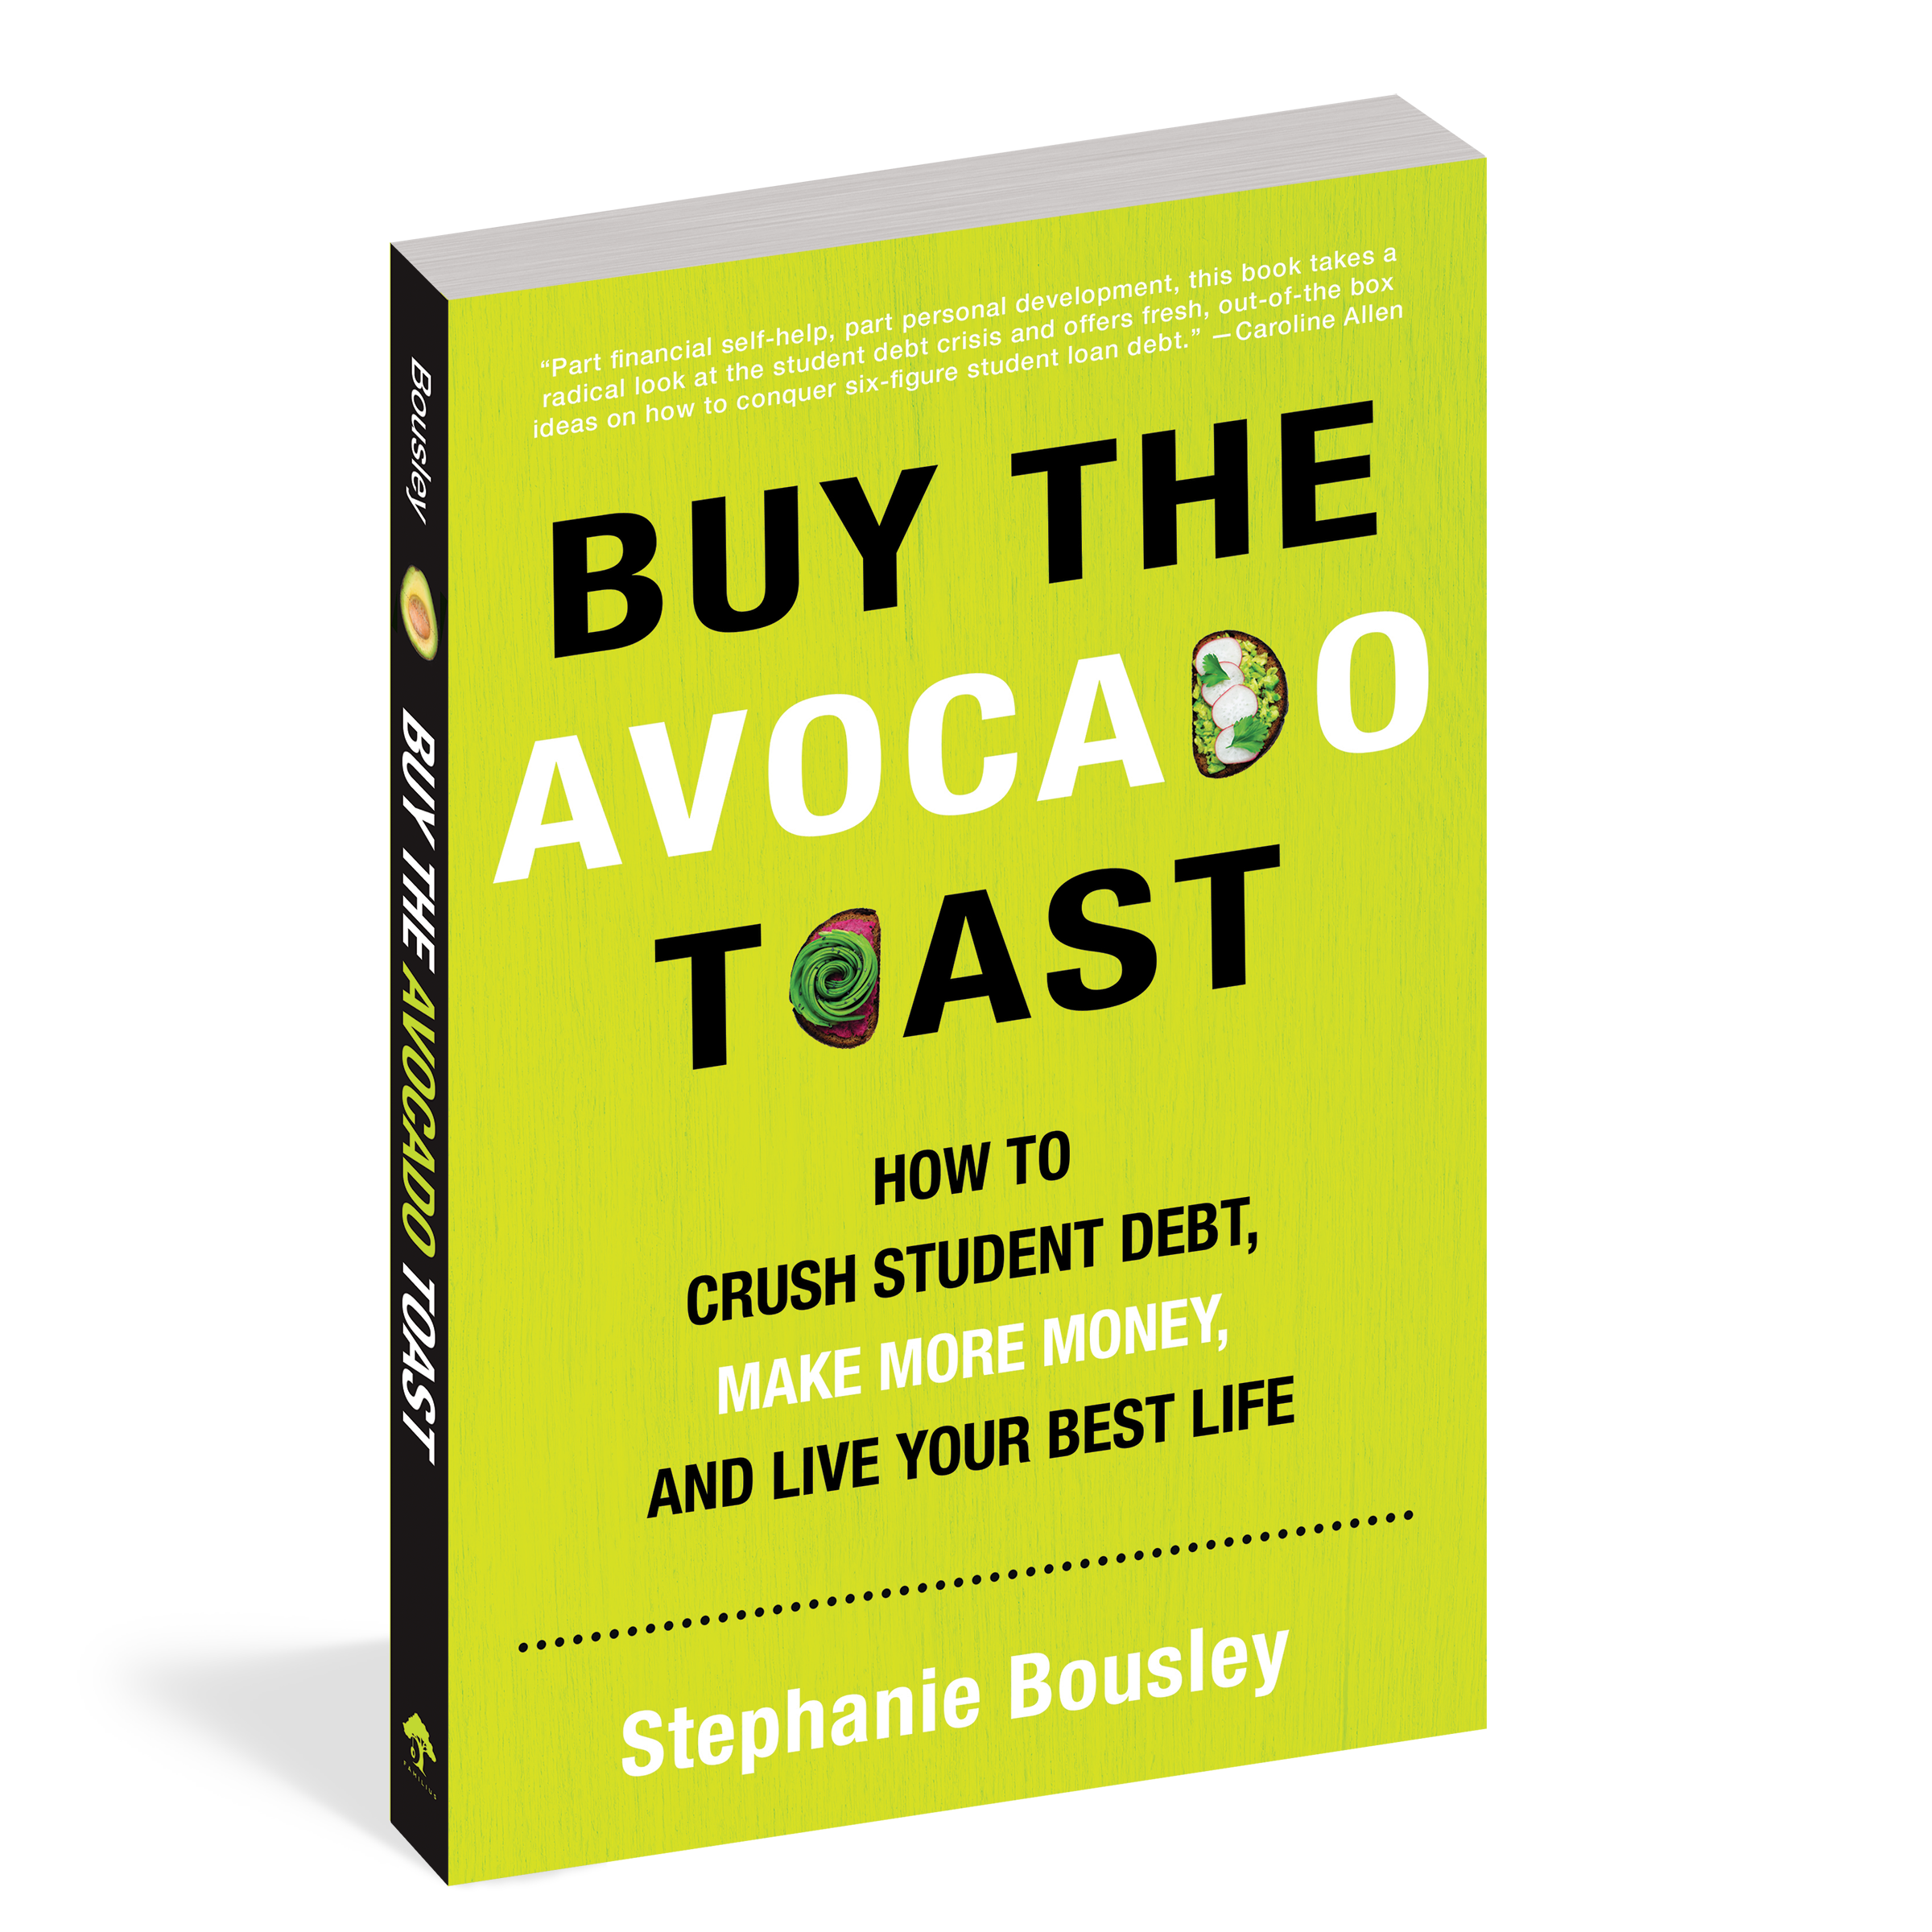 The cover of the book Buy the Avocado Toast.